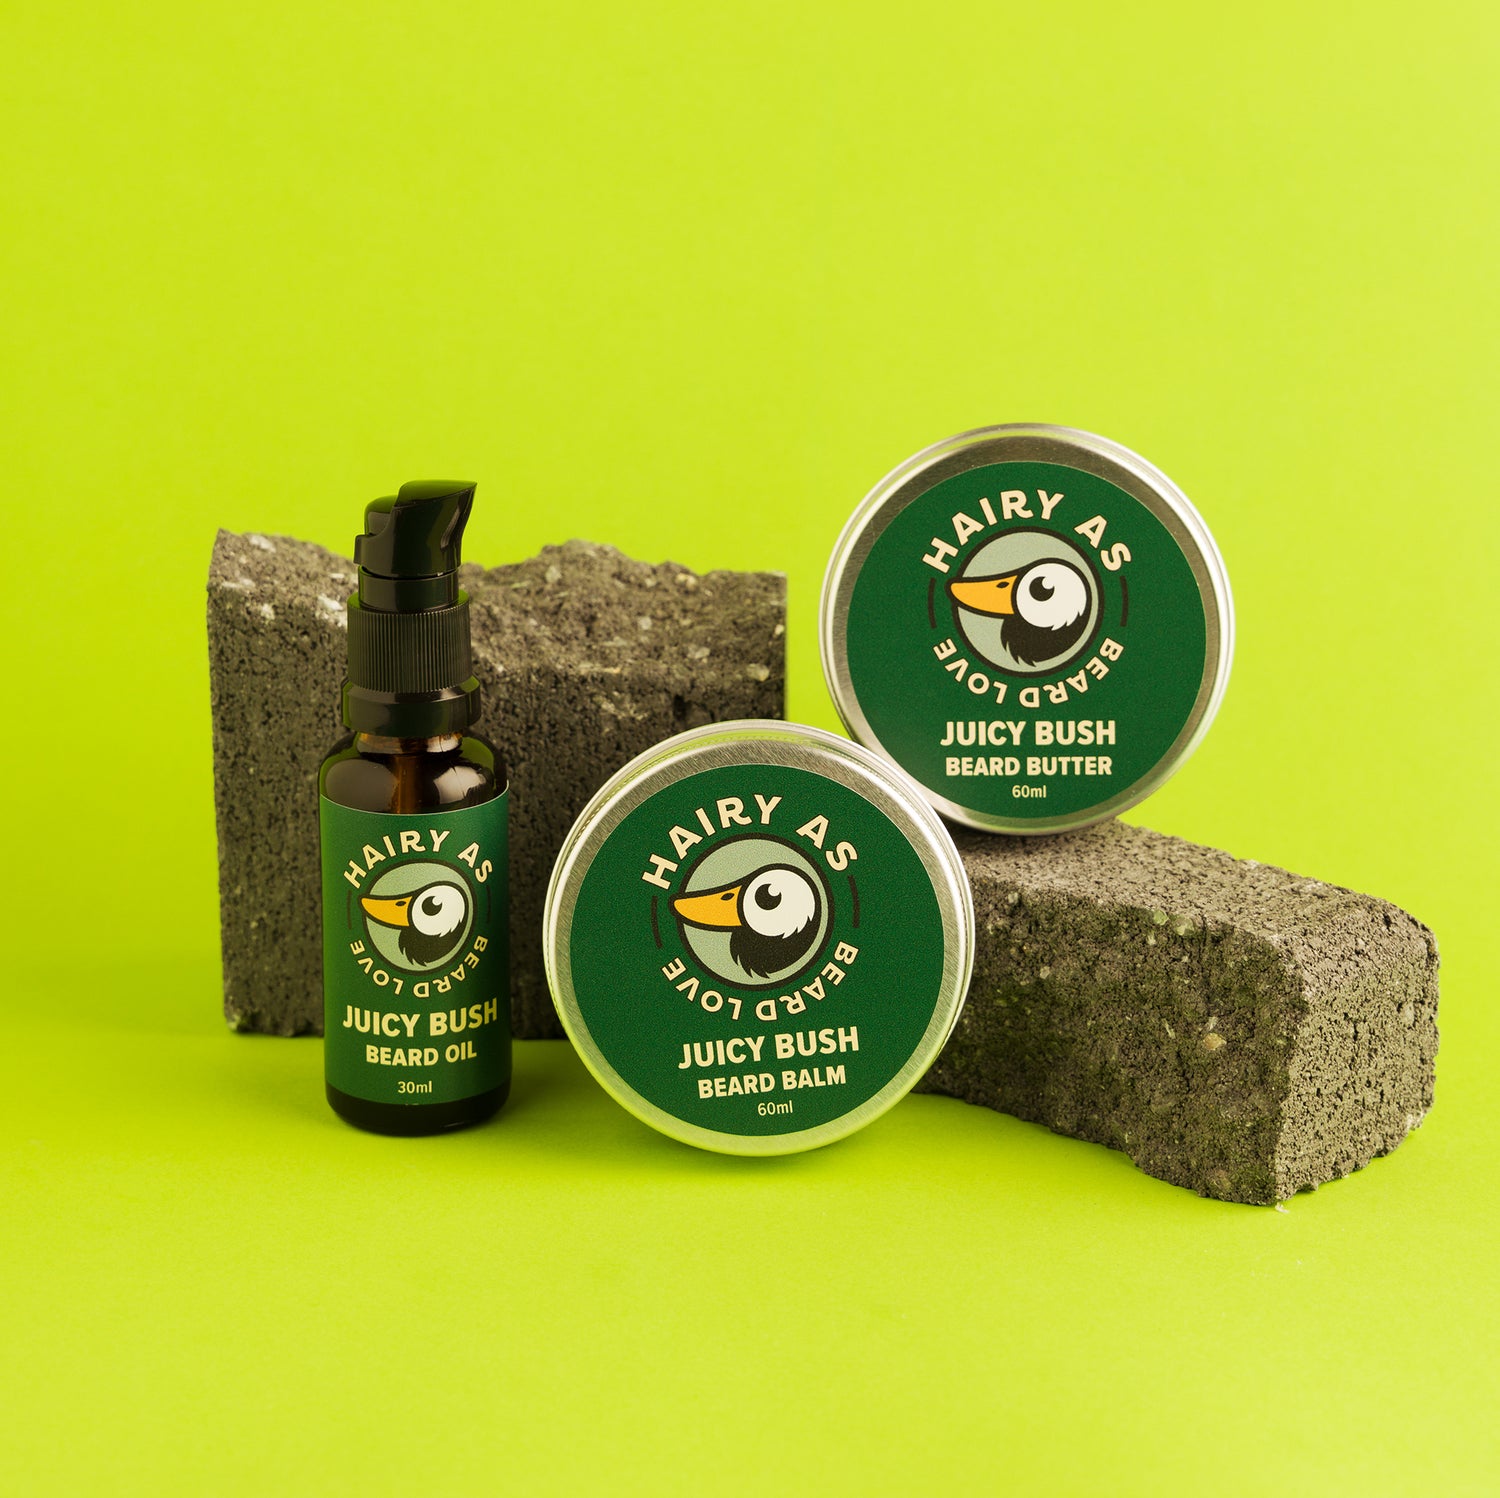 Hairy As's Australian-made Juicy Bush Beard Collection. An amber 30ml bottle of Beard Oil, and 60ml aluminium tins of Beard Butter and Beard Balm. Labels are green with jasmine font. They are displayed arranged on some cement bricks on a green background.